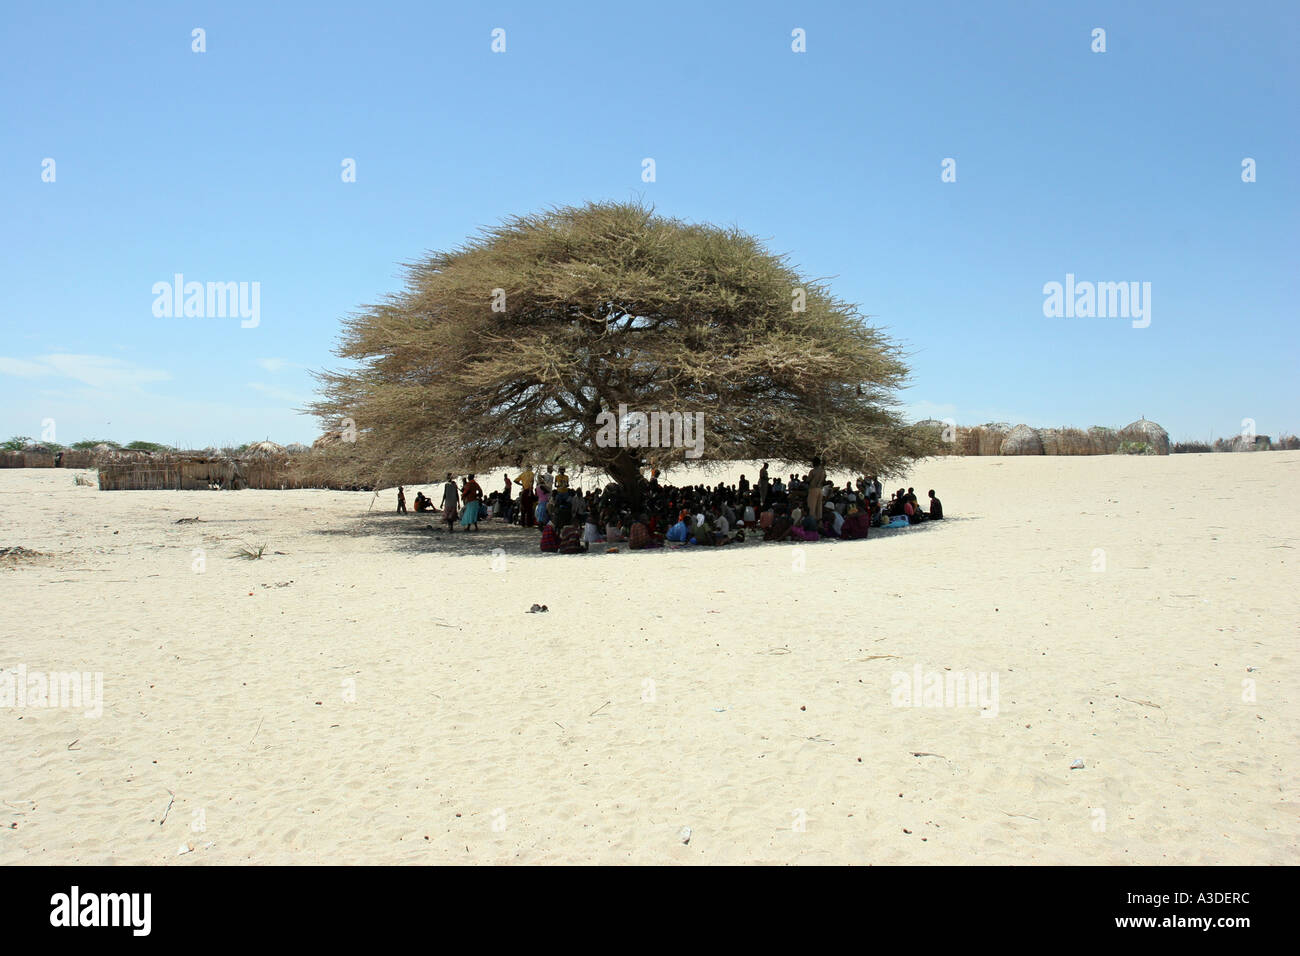 Longech village meetings are held under the tree the midday sun can see temperatures over 40 degrees celsius Stock Photo